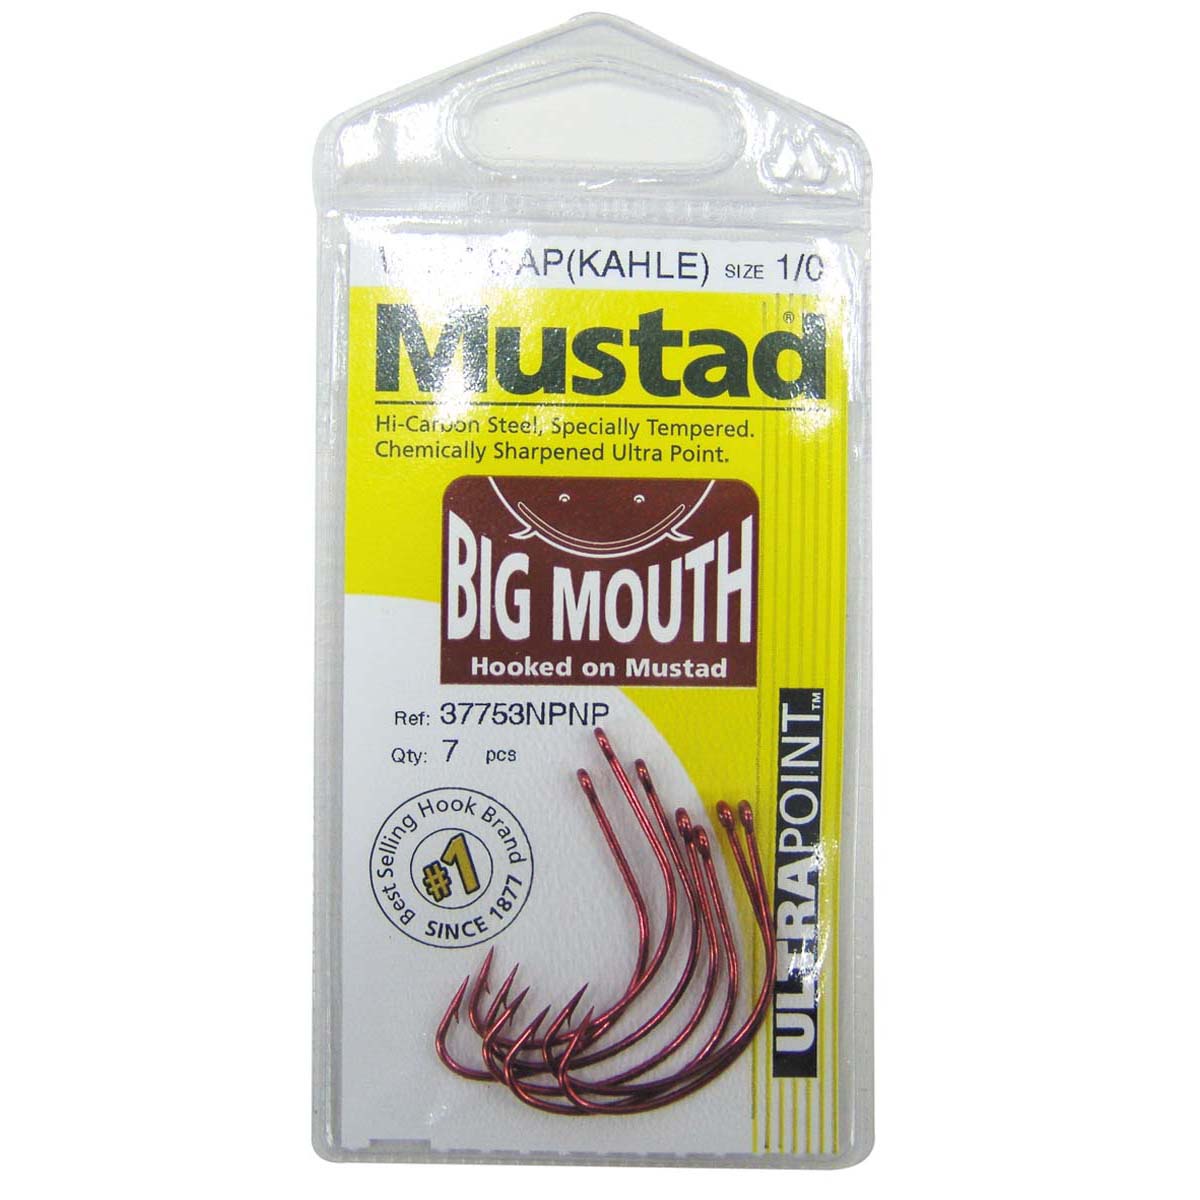 Mustad Big Mouth Hooks 3 / 0 6 Pack